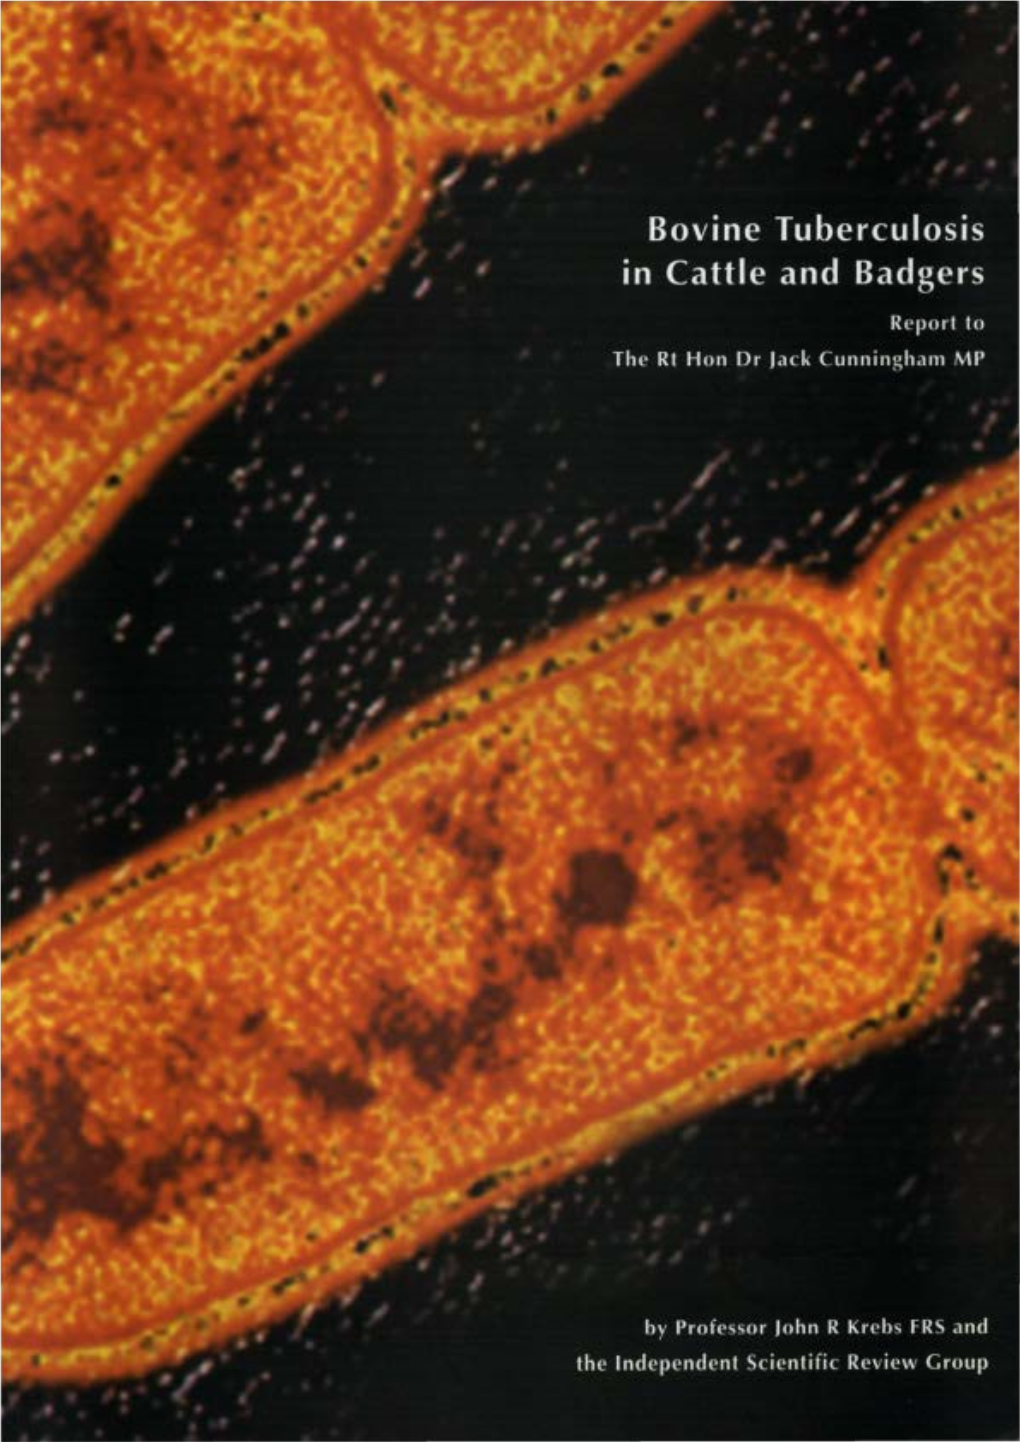 1997 Krebs Report on Bovine Tuberculosis in Cattle and Badgers